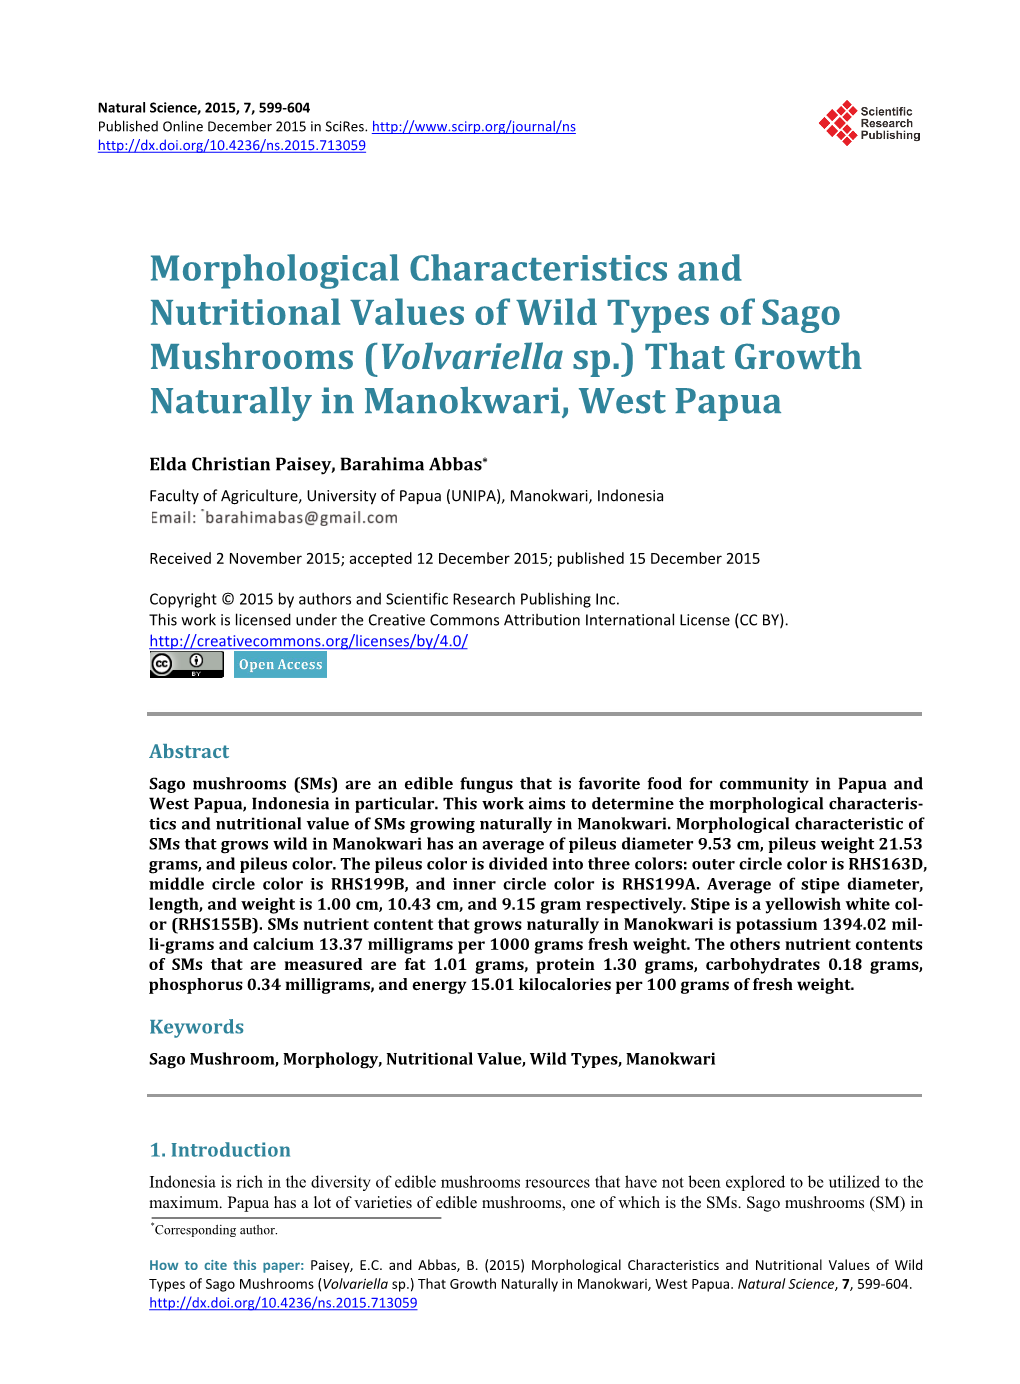 Morphological Characteristics and Nutritional Values of Wild Types of Sago Mushrooms (Volvariella Sp.) That Growth Naturally in Manokwari, West Papua